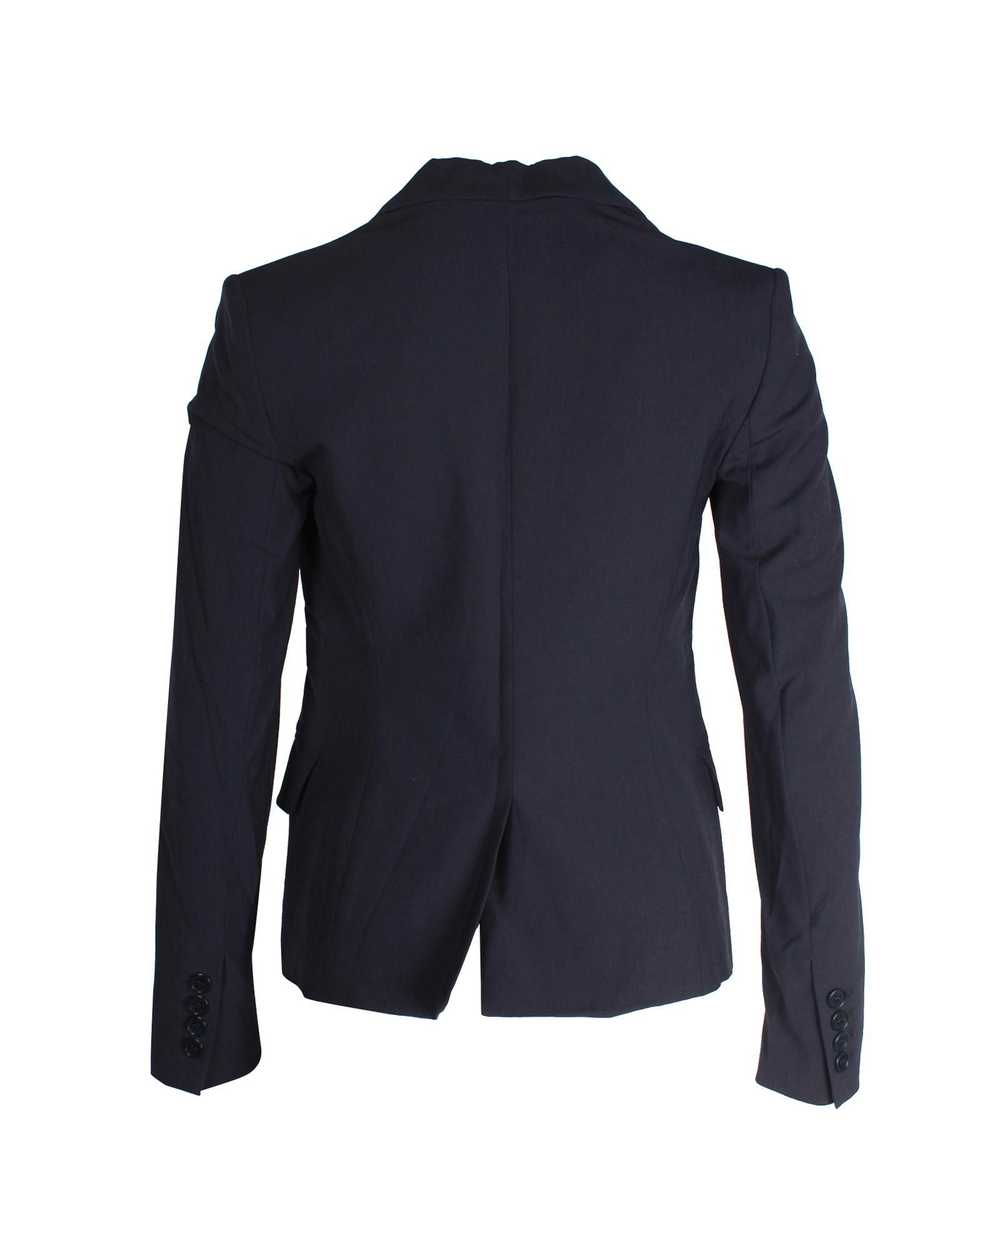 Theory Navy Blue Wool Single-Breasted Blazer - image 5